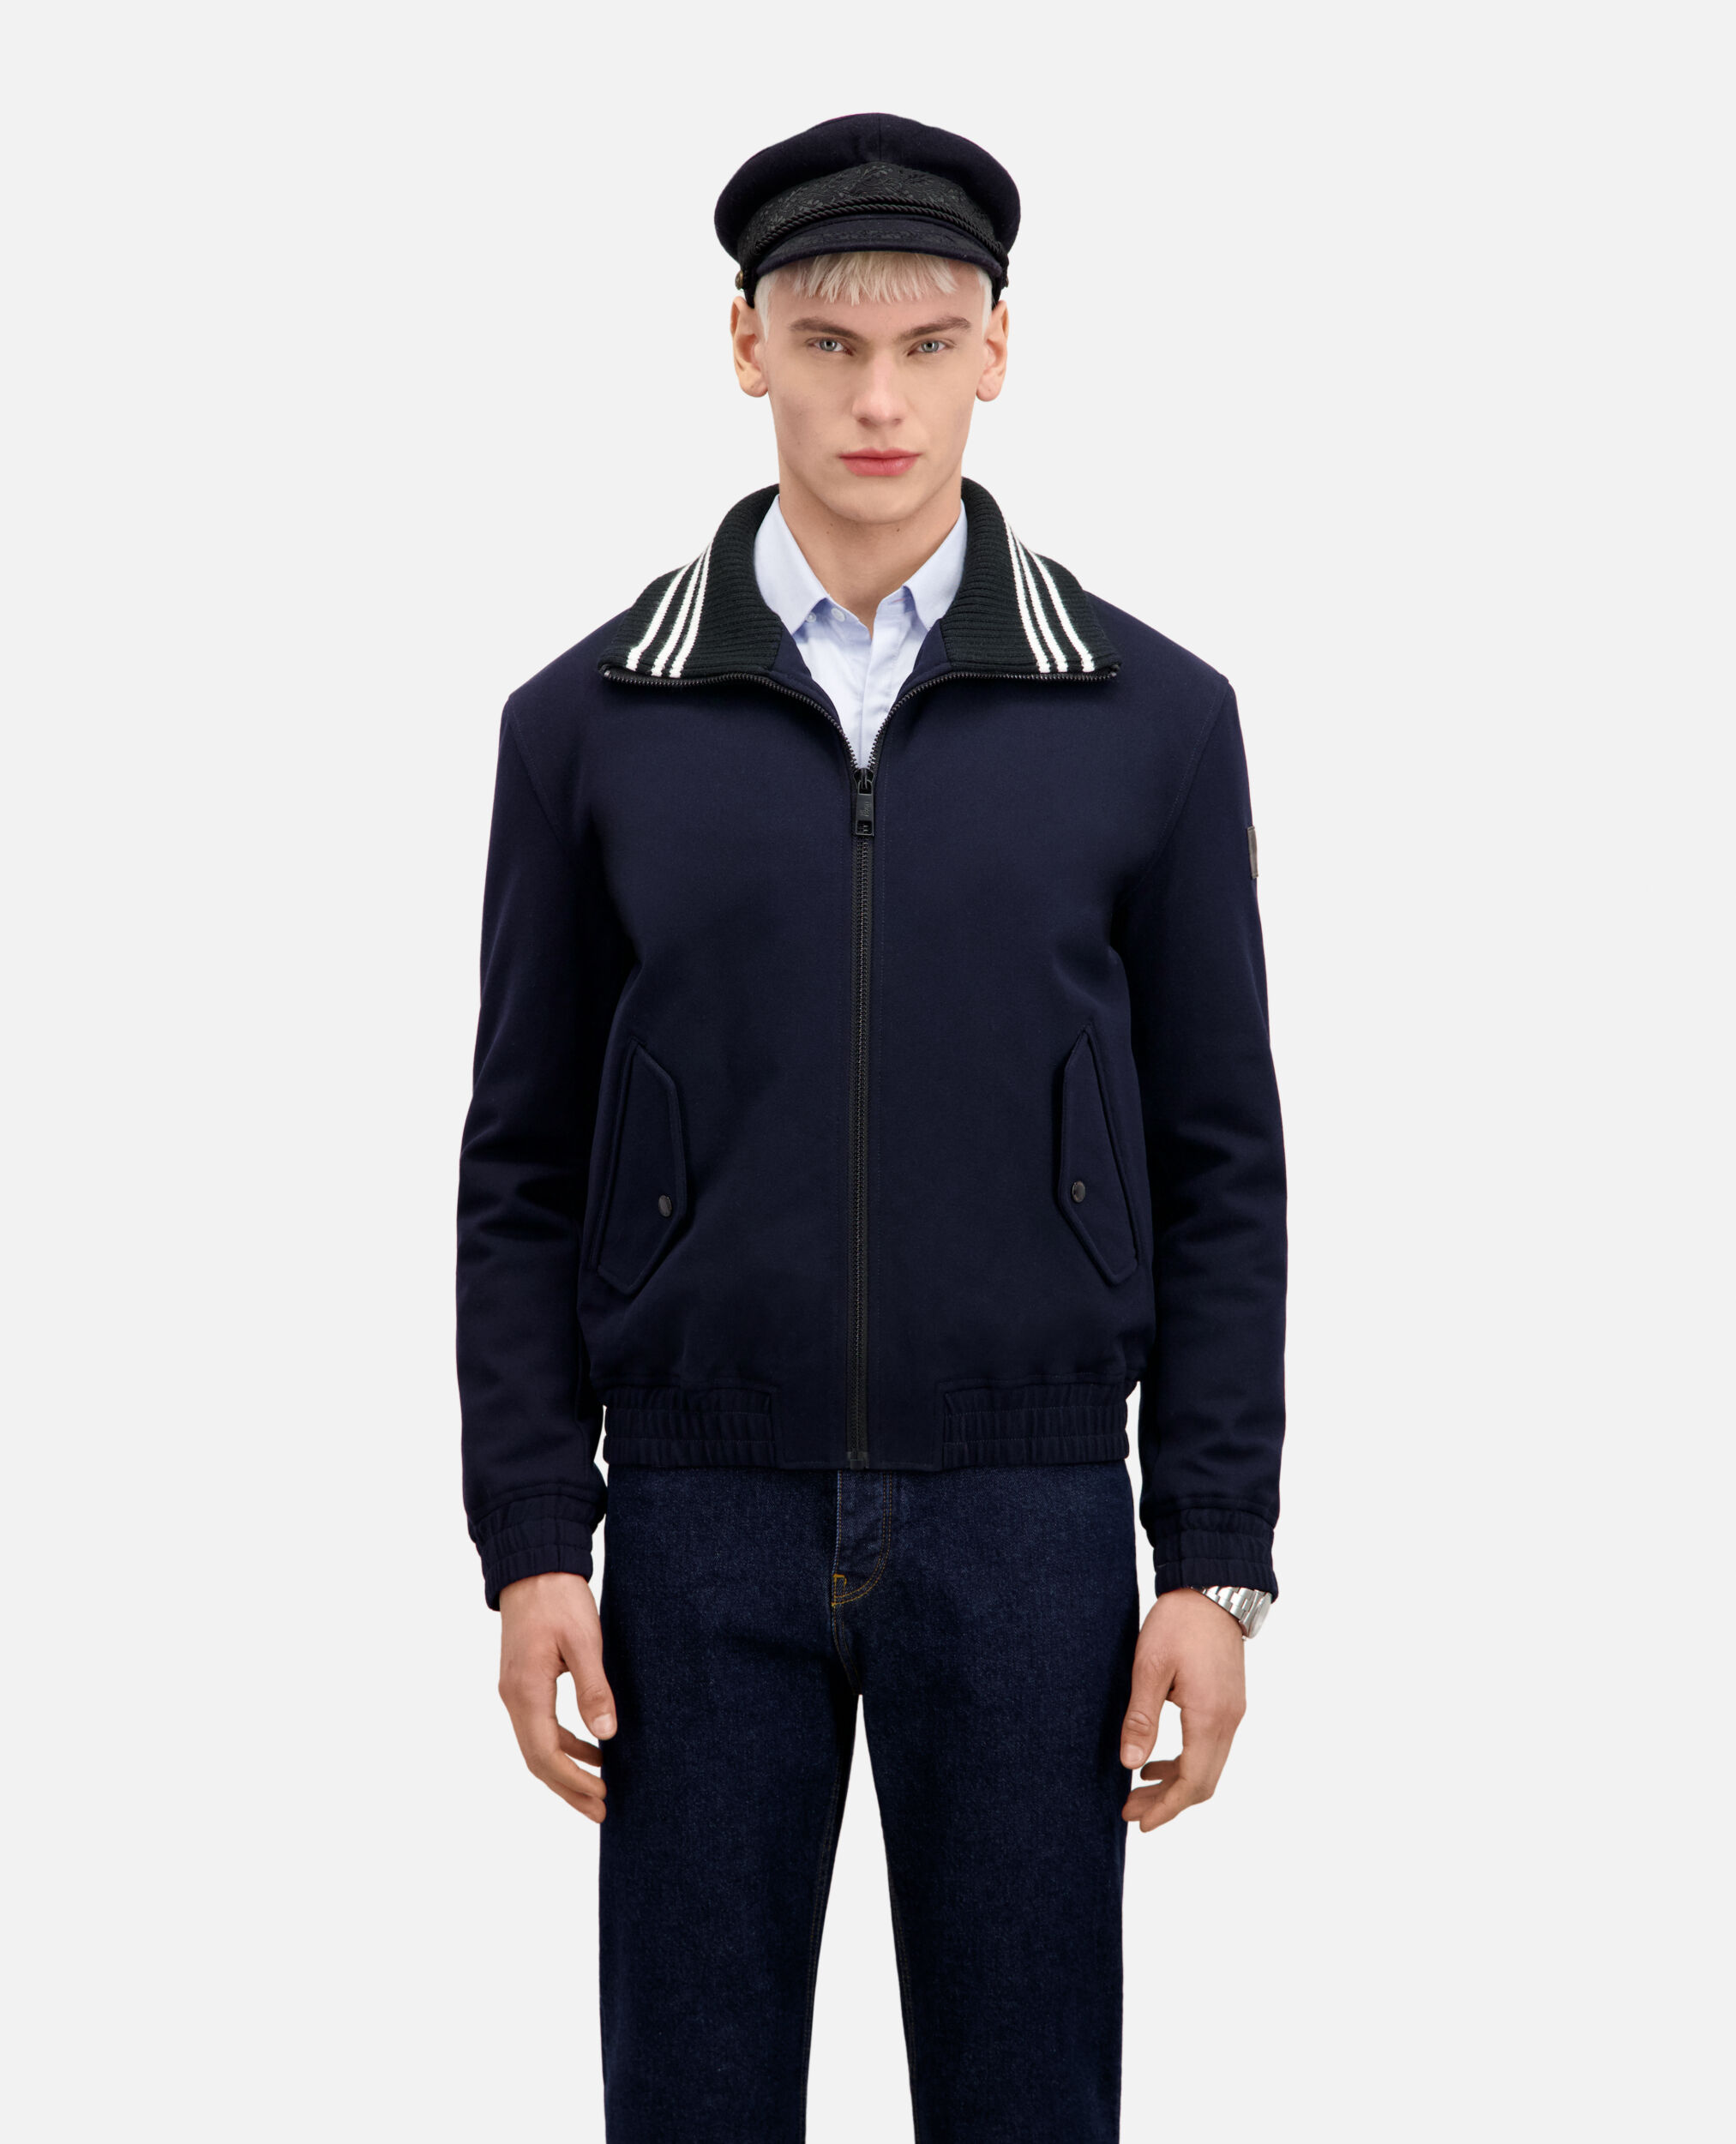 Black jacket with stand-up collar, ROYAL BLUE - DARK NAVY, hi-res image number null